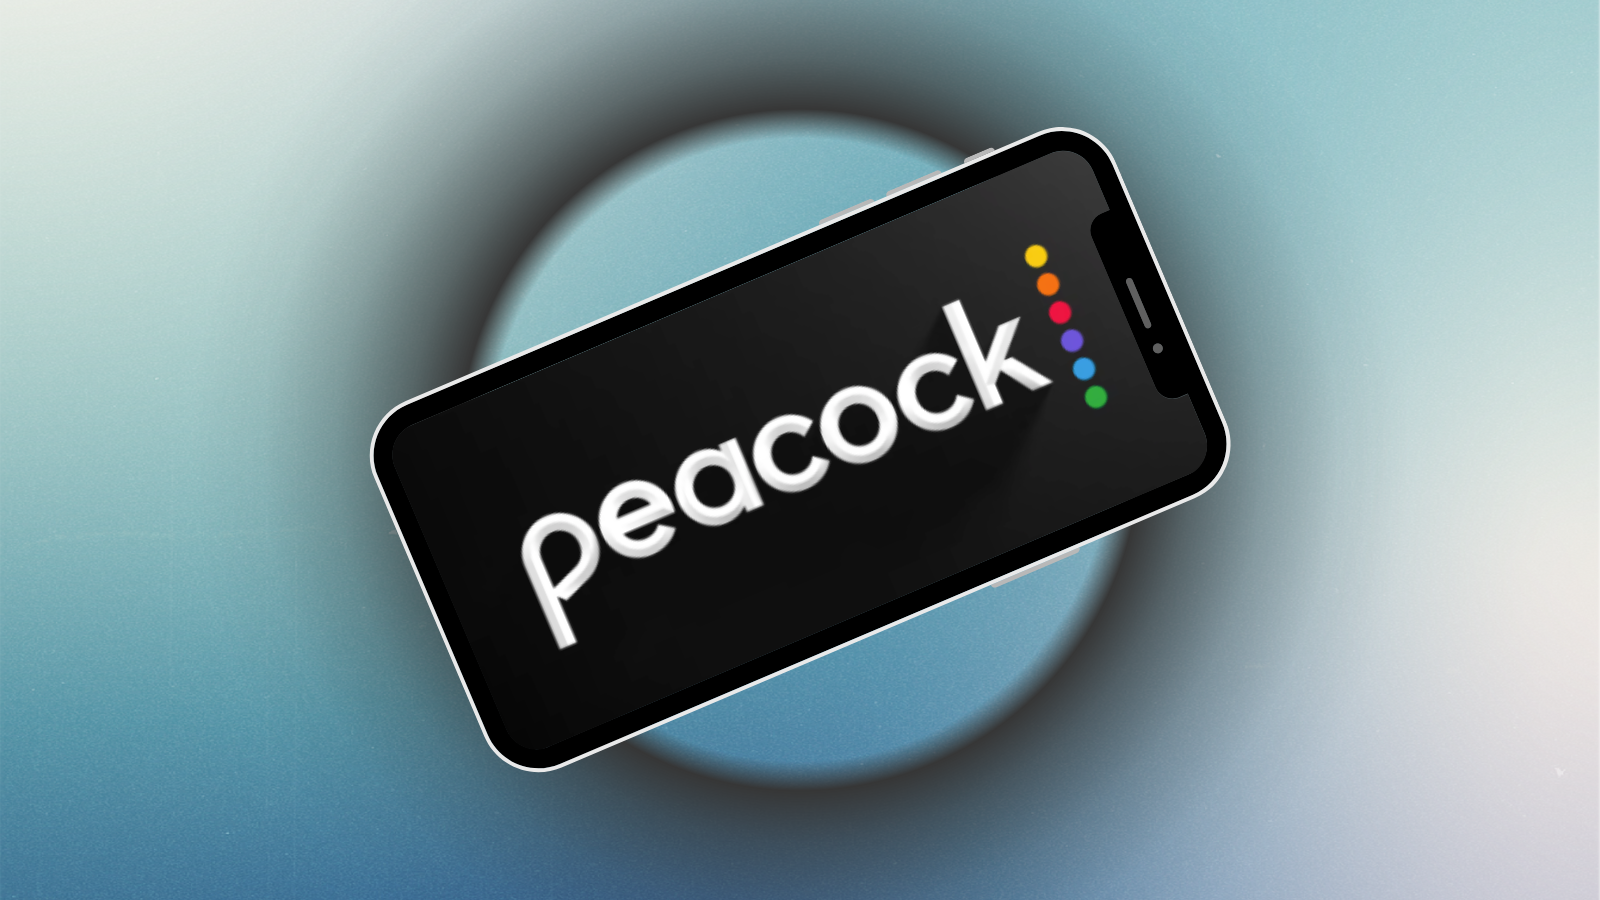 phone with Peacock app logo on screen and blue background